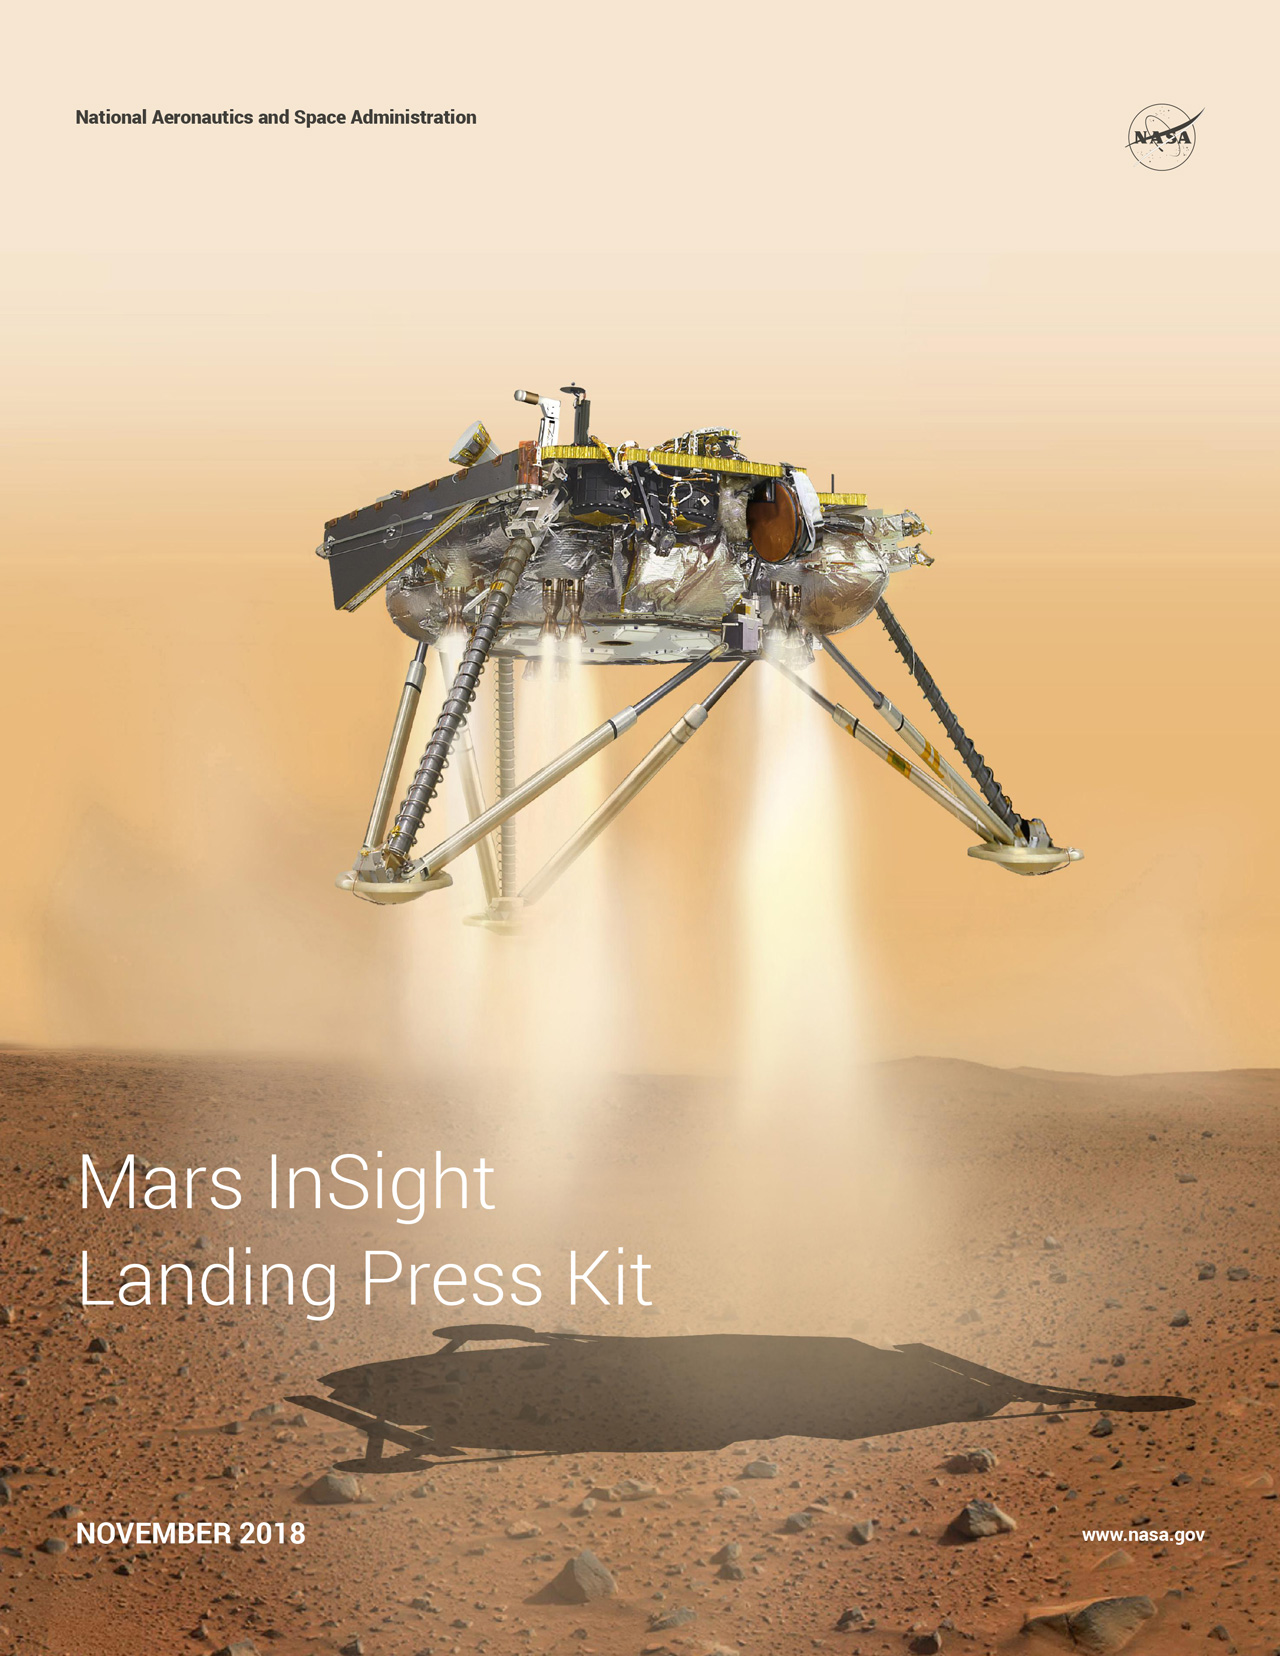 PDF download of facts and information about the InSight landing on Mars.